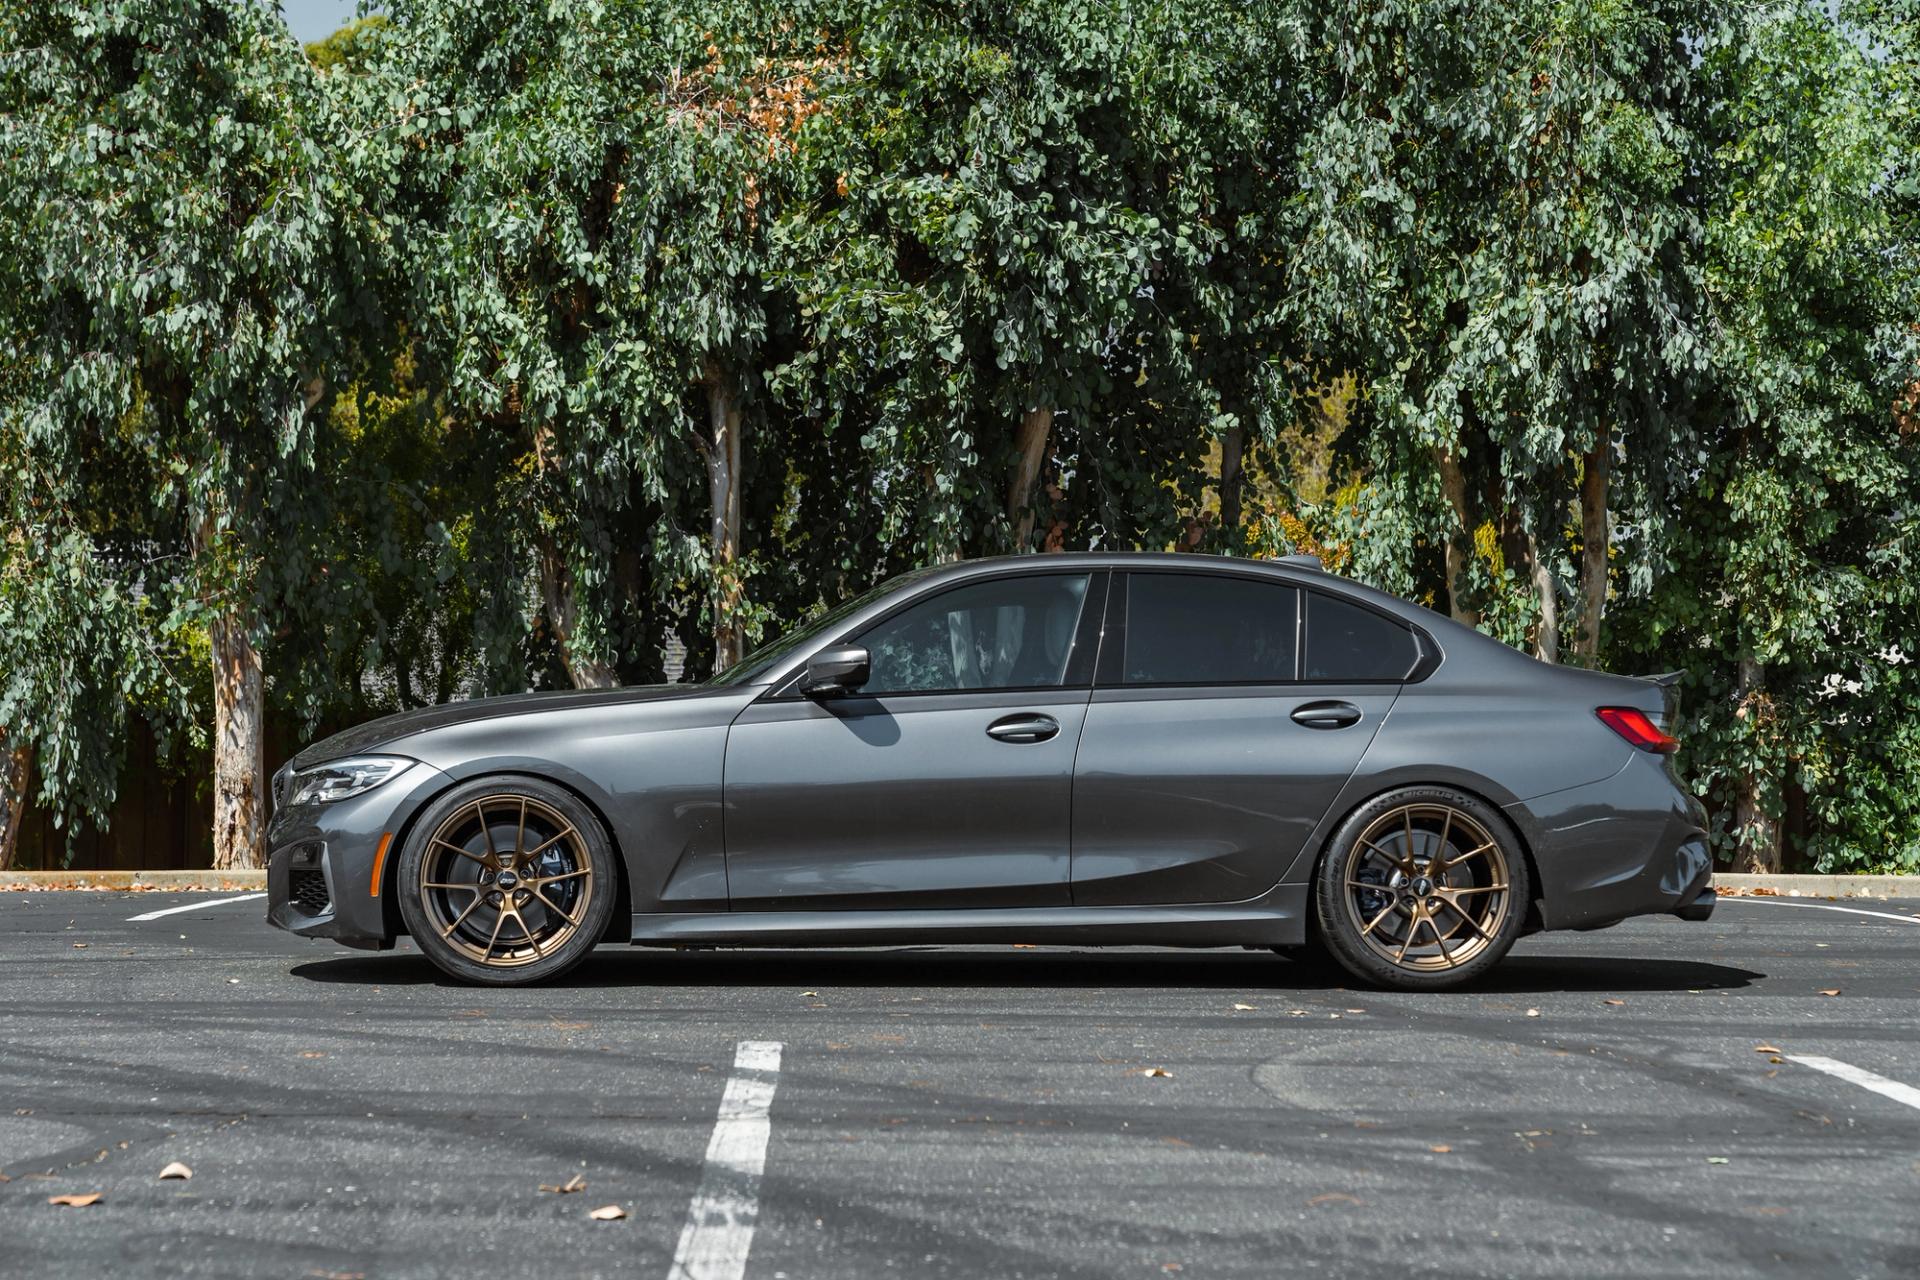 BMW G31 Wagon 5 Series with 19 VS-5RS in Satin Bronze on BMW G30